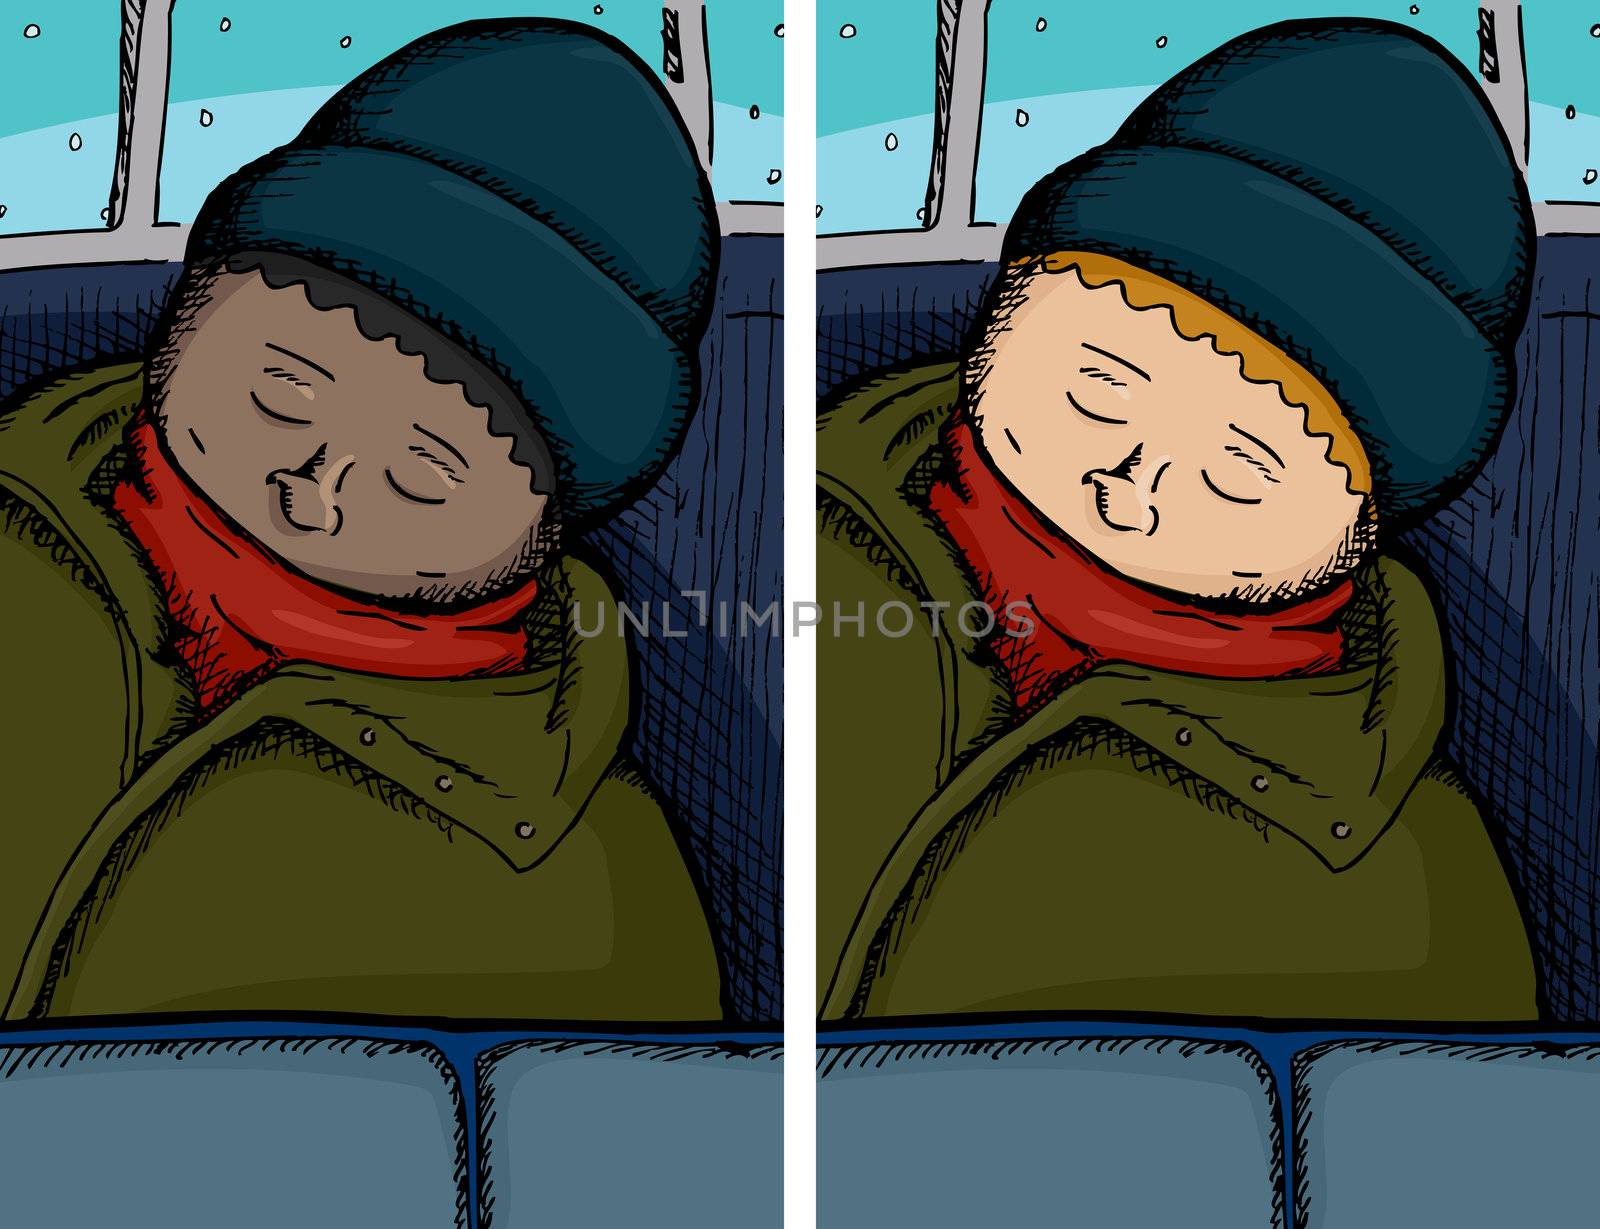 Person Asleep on Bus by TheBlackRhino